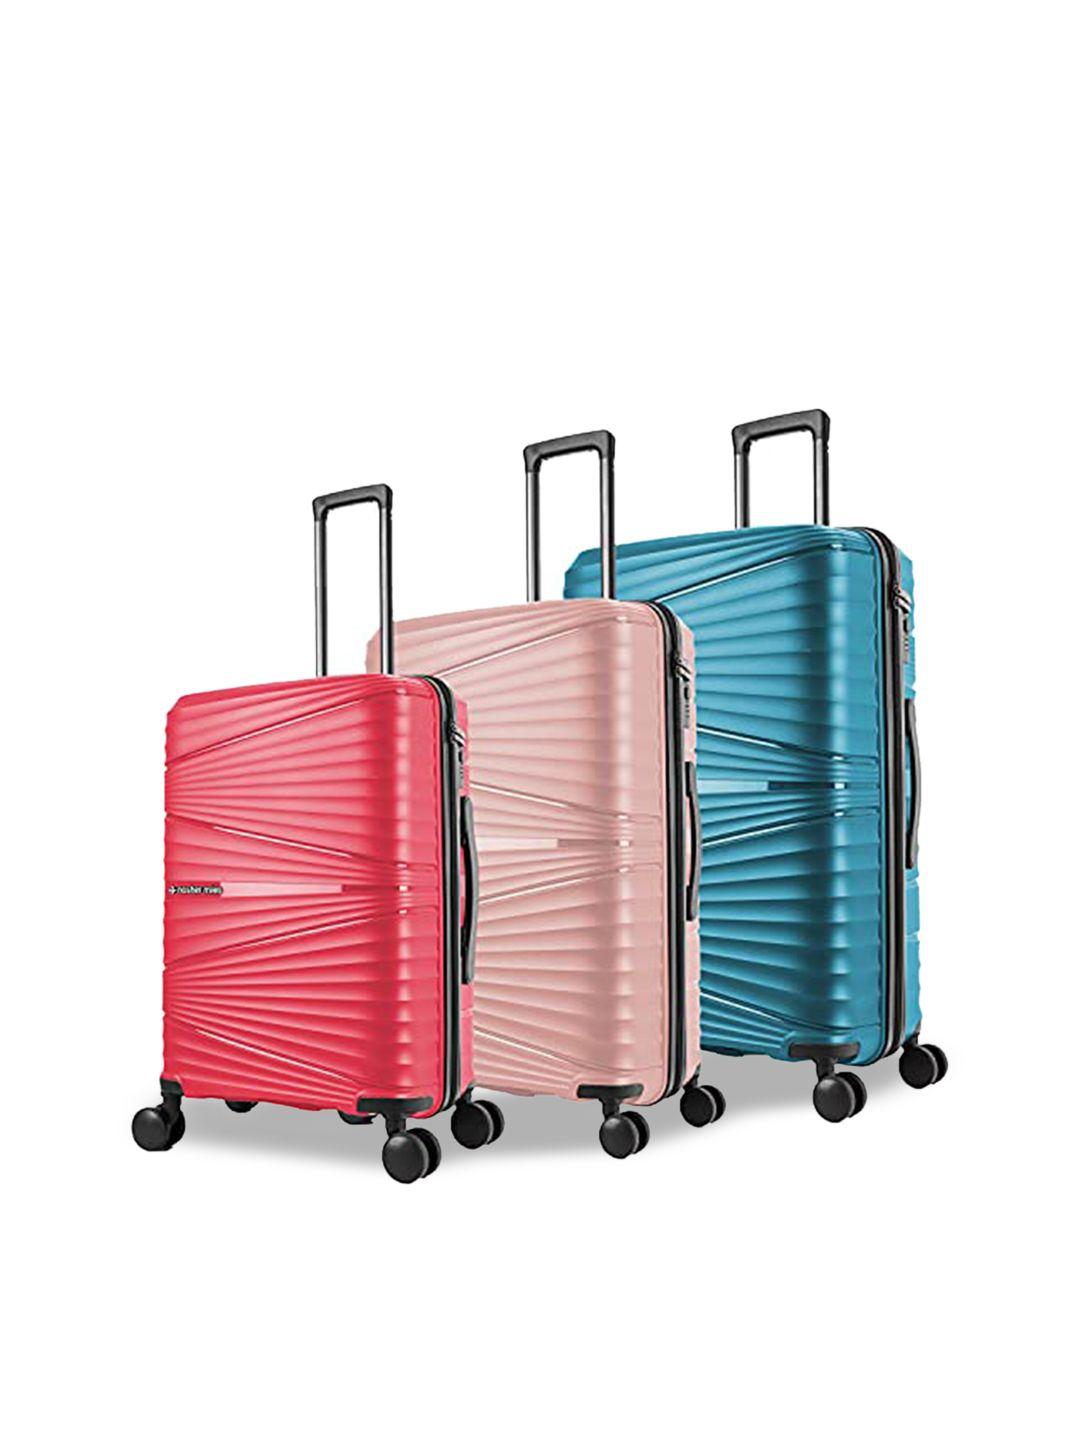 nasher miles set of 3 textured hard-sided trolley suitcase